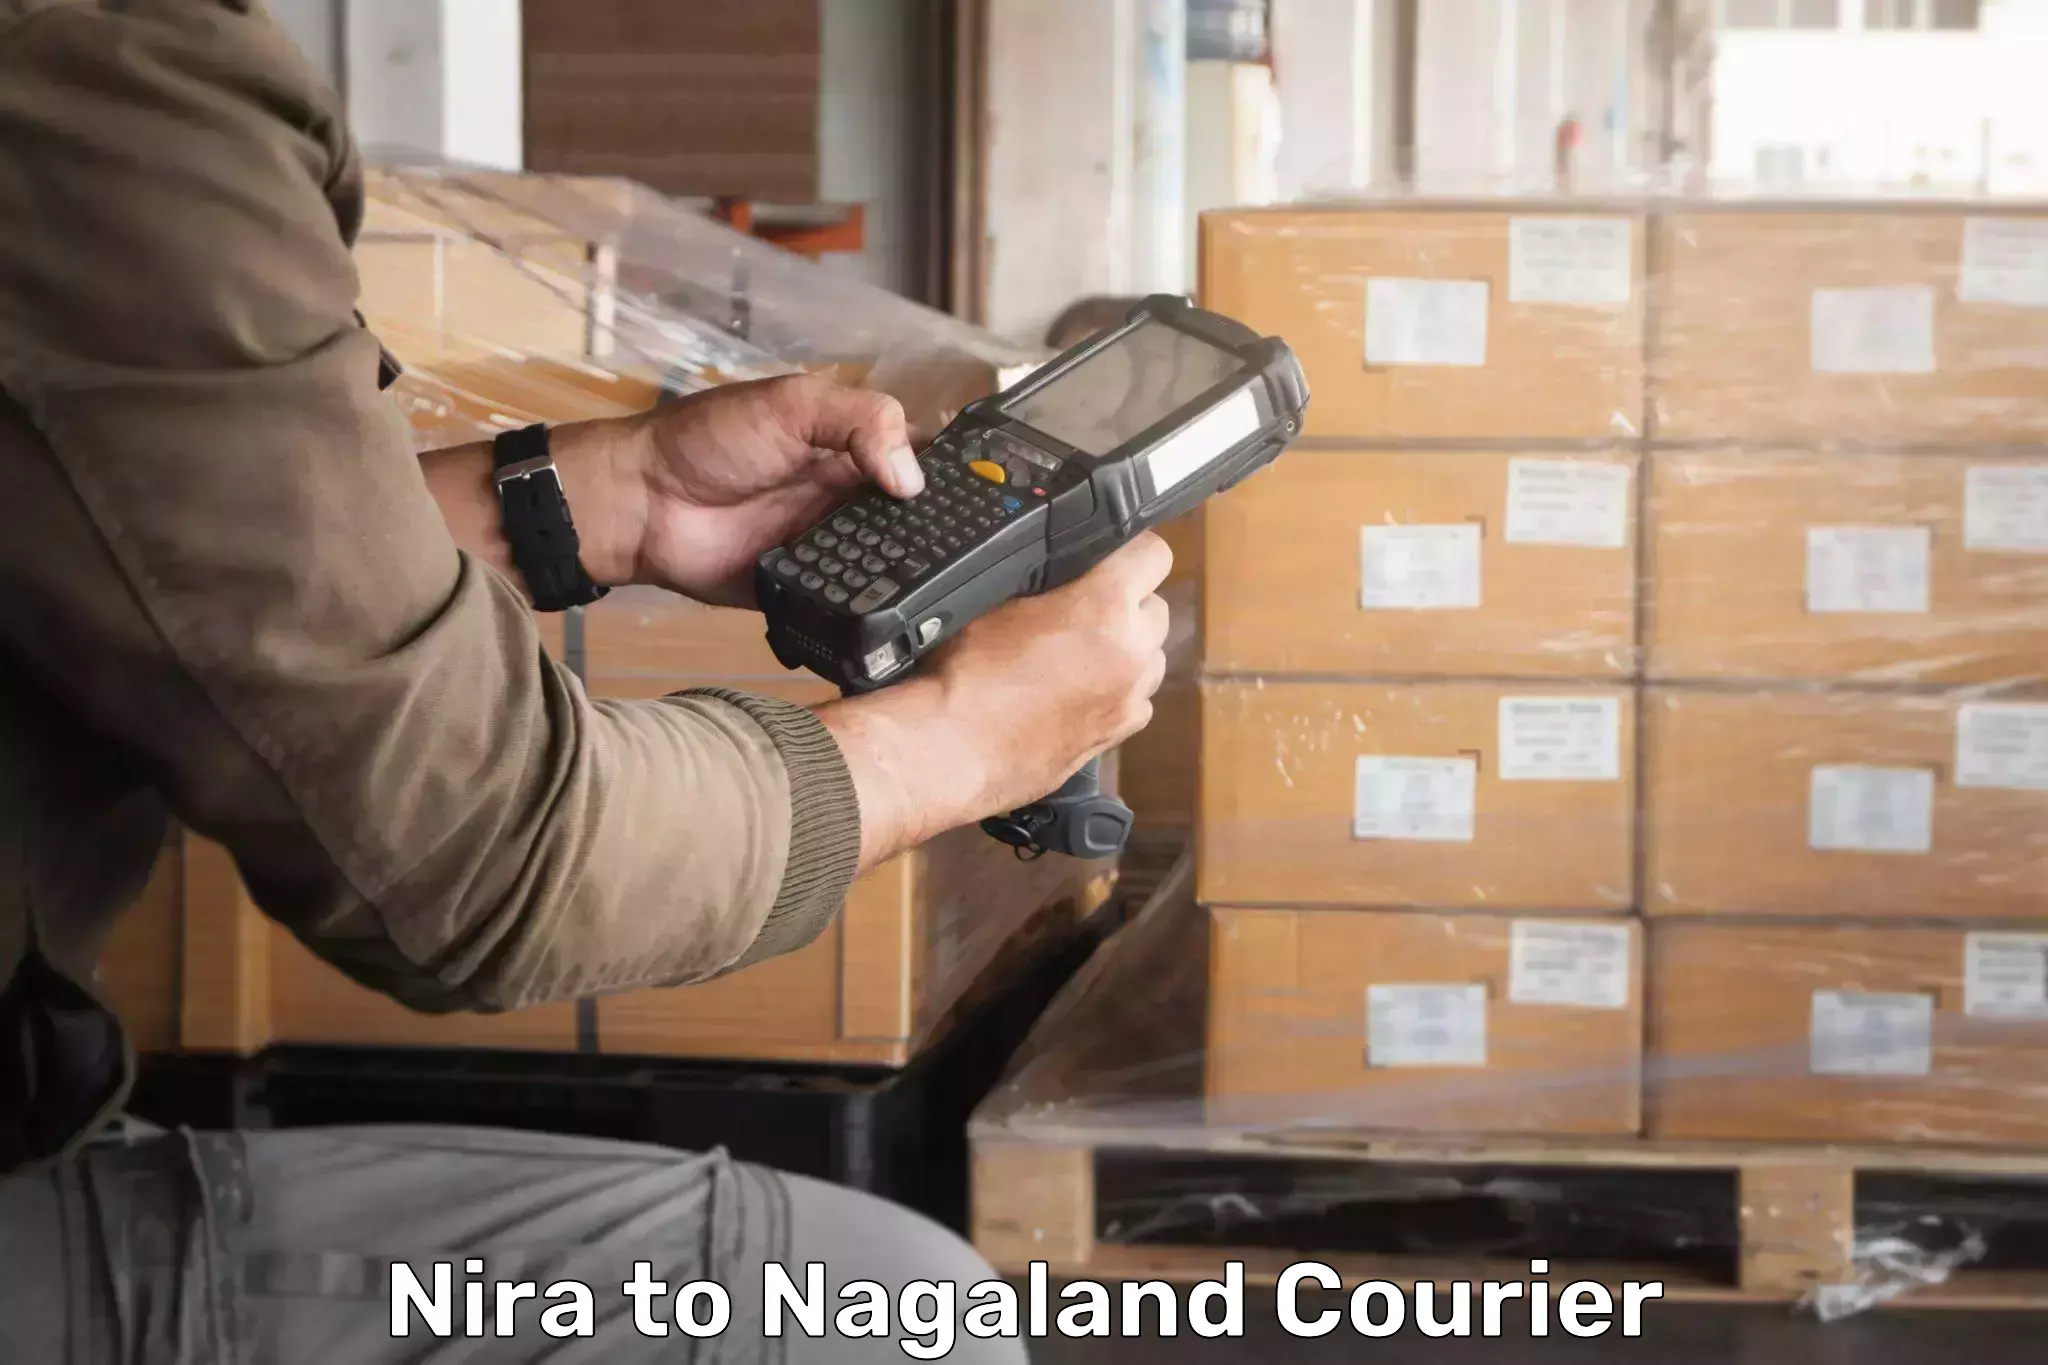 Easy access courier services Nira to Nagaland